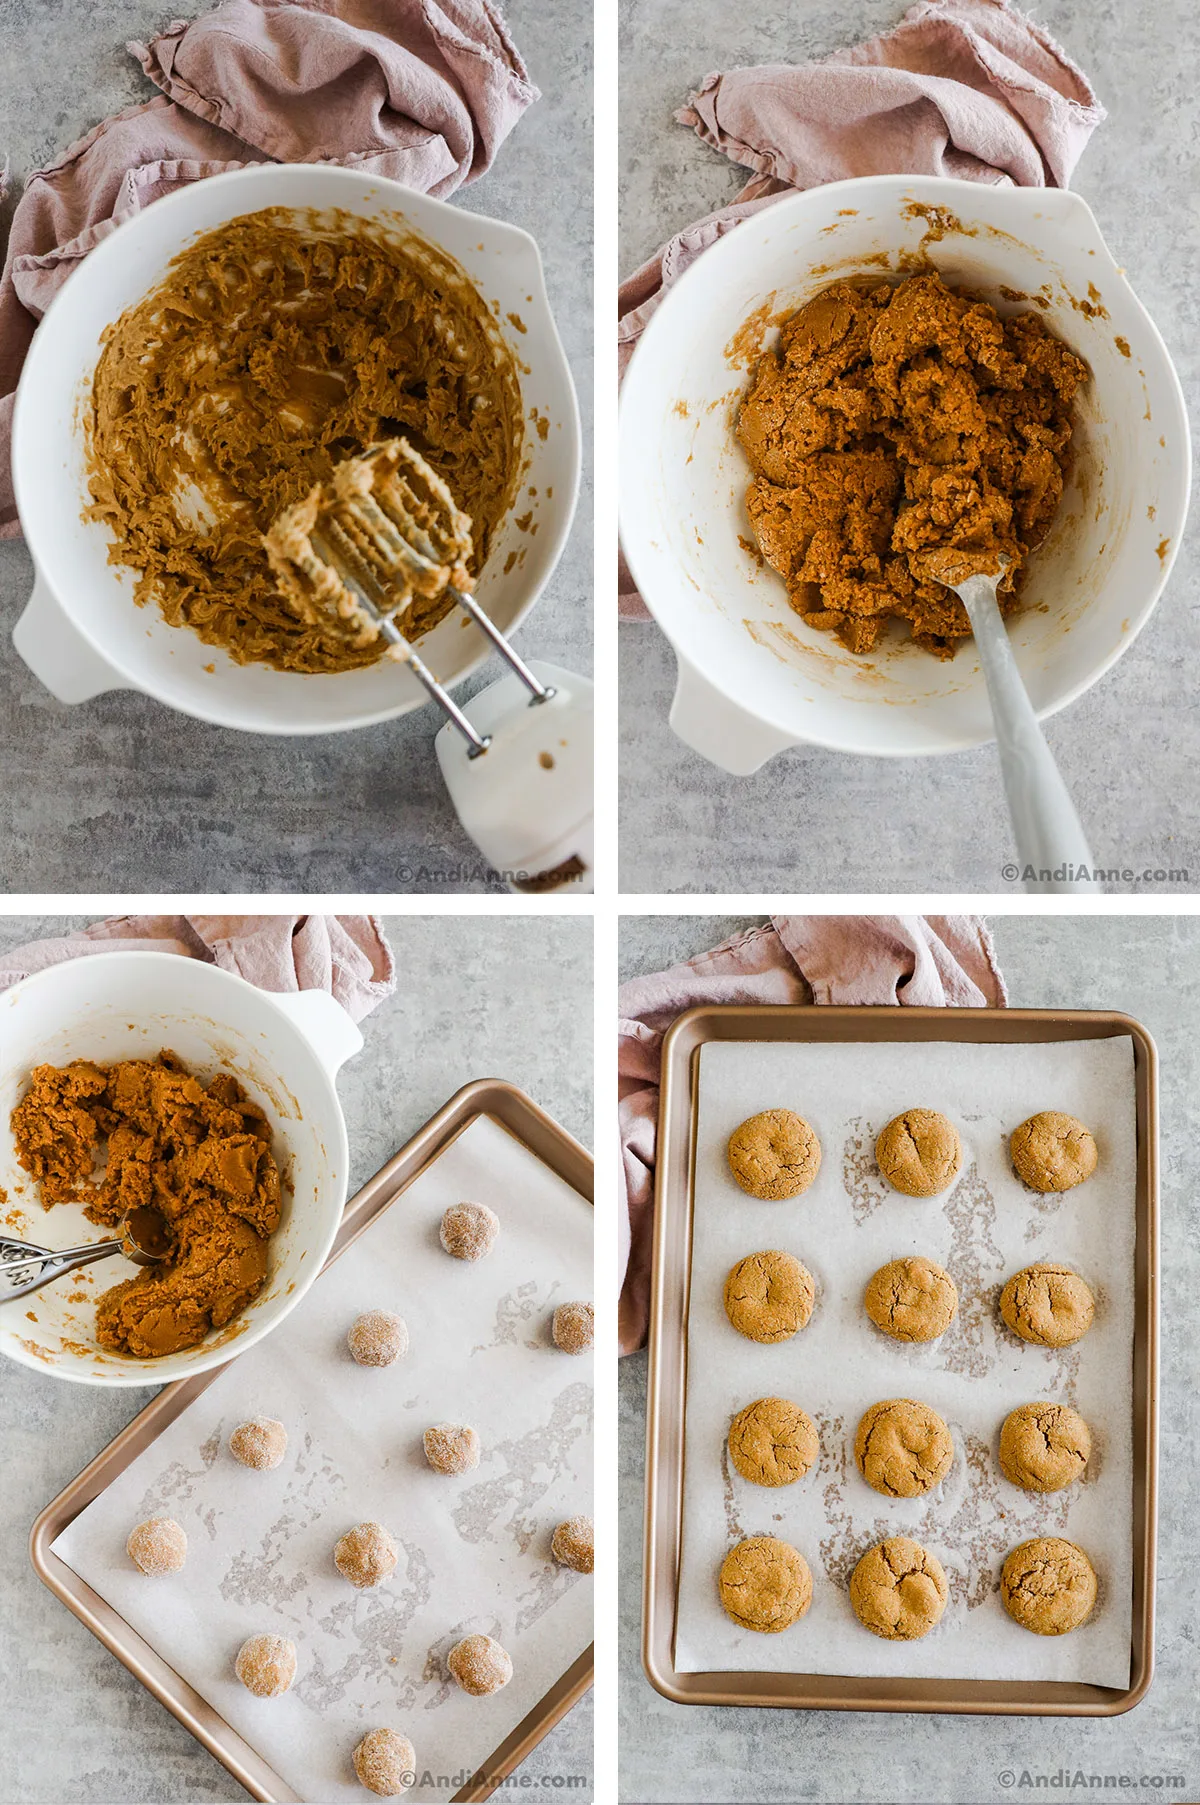 Four images, first two are cookie dough being mixed at various stages, third is dough in bowl and rolled cookies on baking sheet. Fourth is baked cookies on baking sheet.